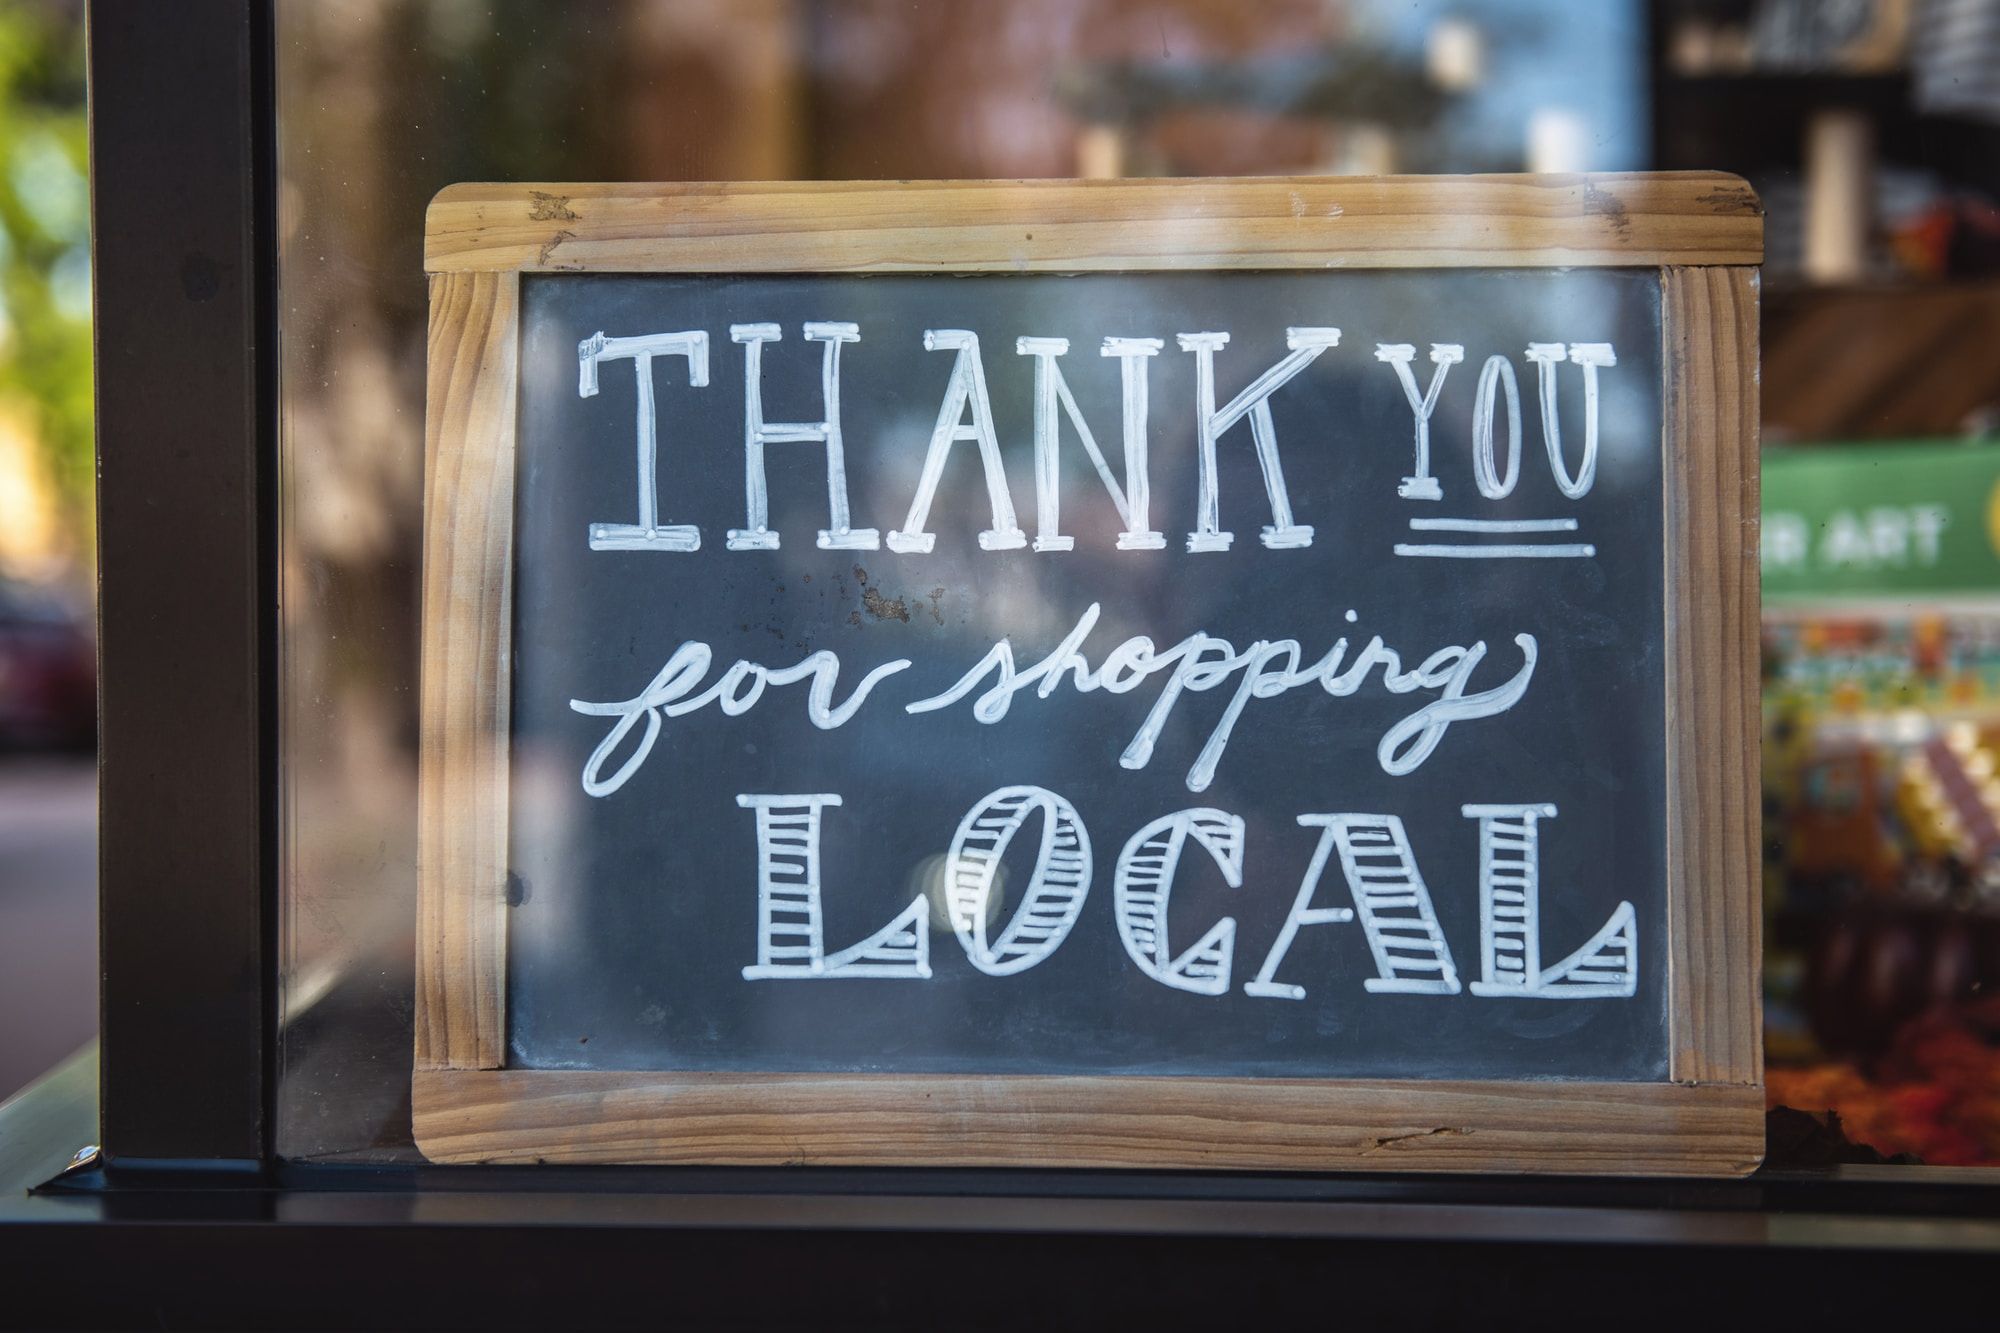 A sign in a shop window saying "Thank you for shopping local"